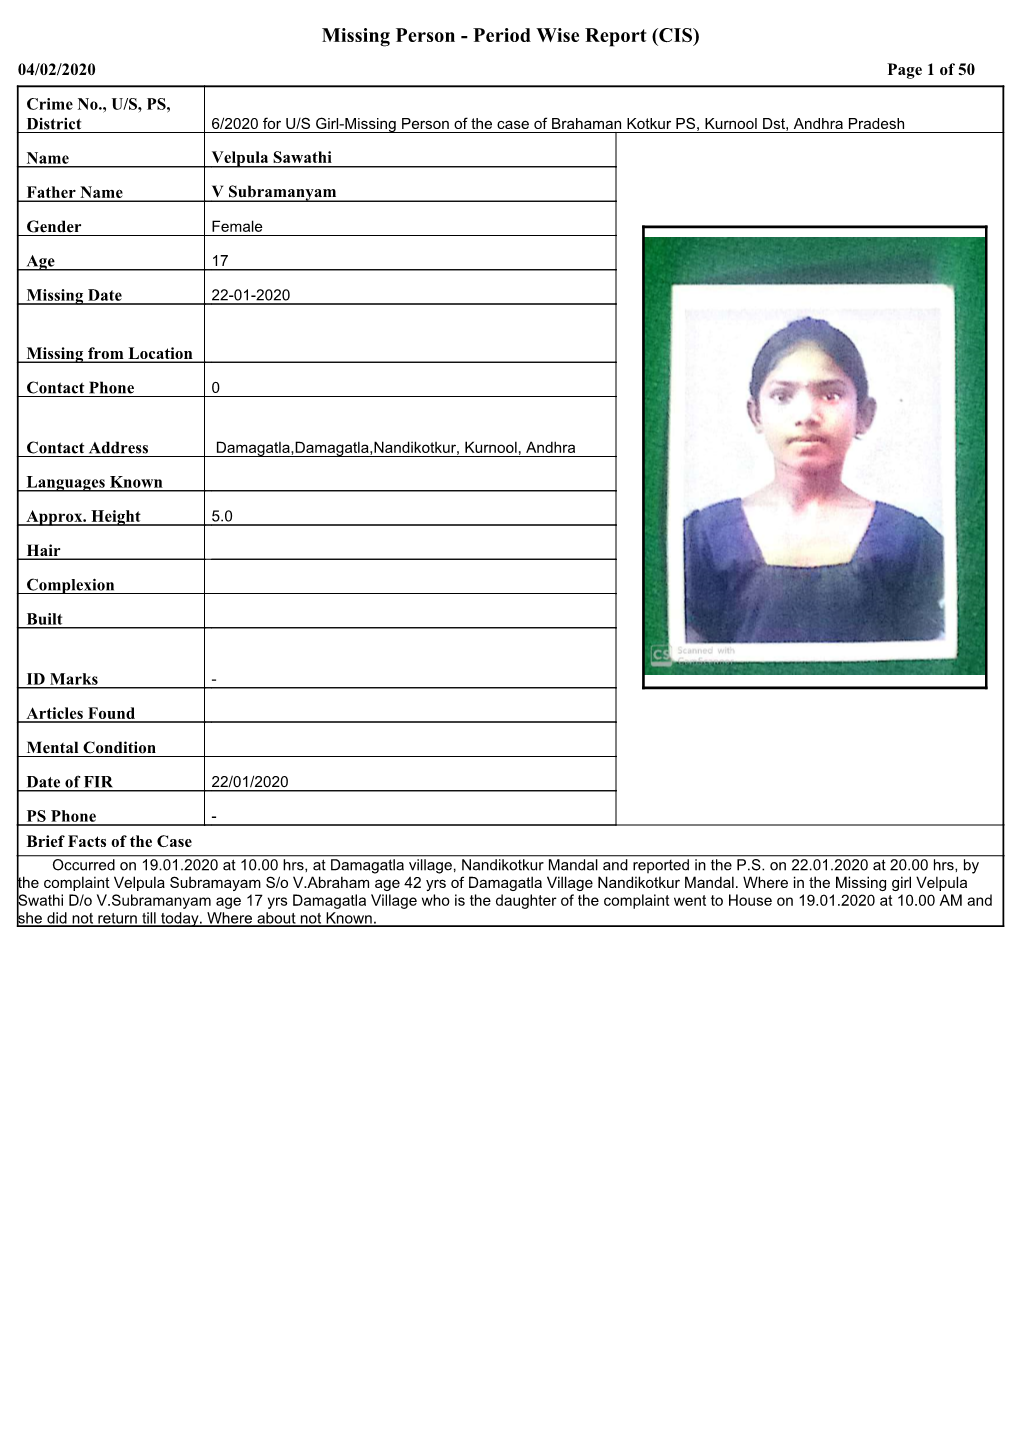 Missing Person - Period Wise Report (CIS) 04/02/2020 Page 1 of 50